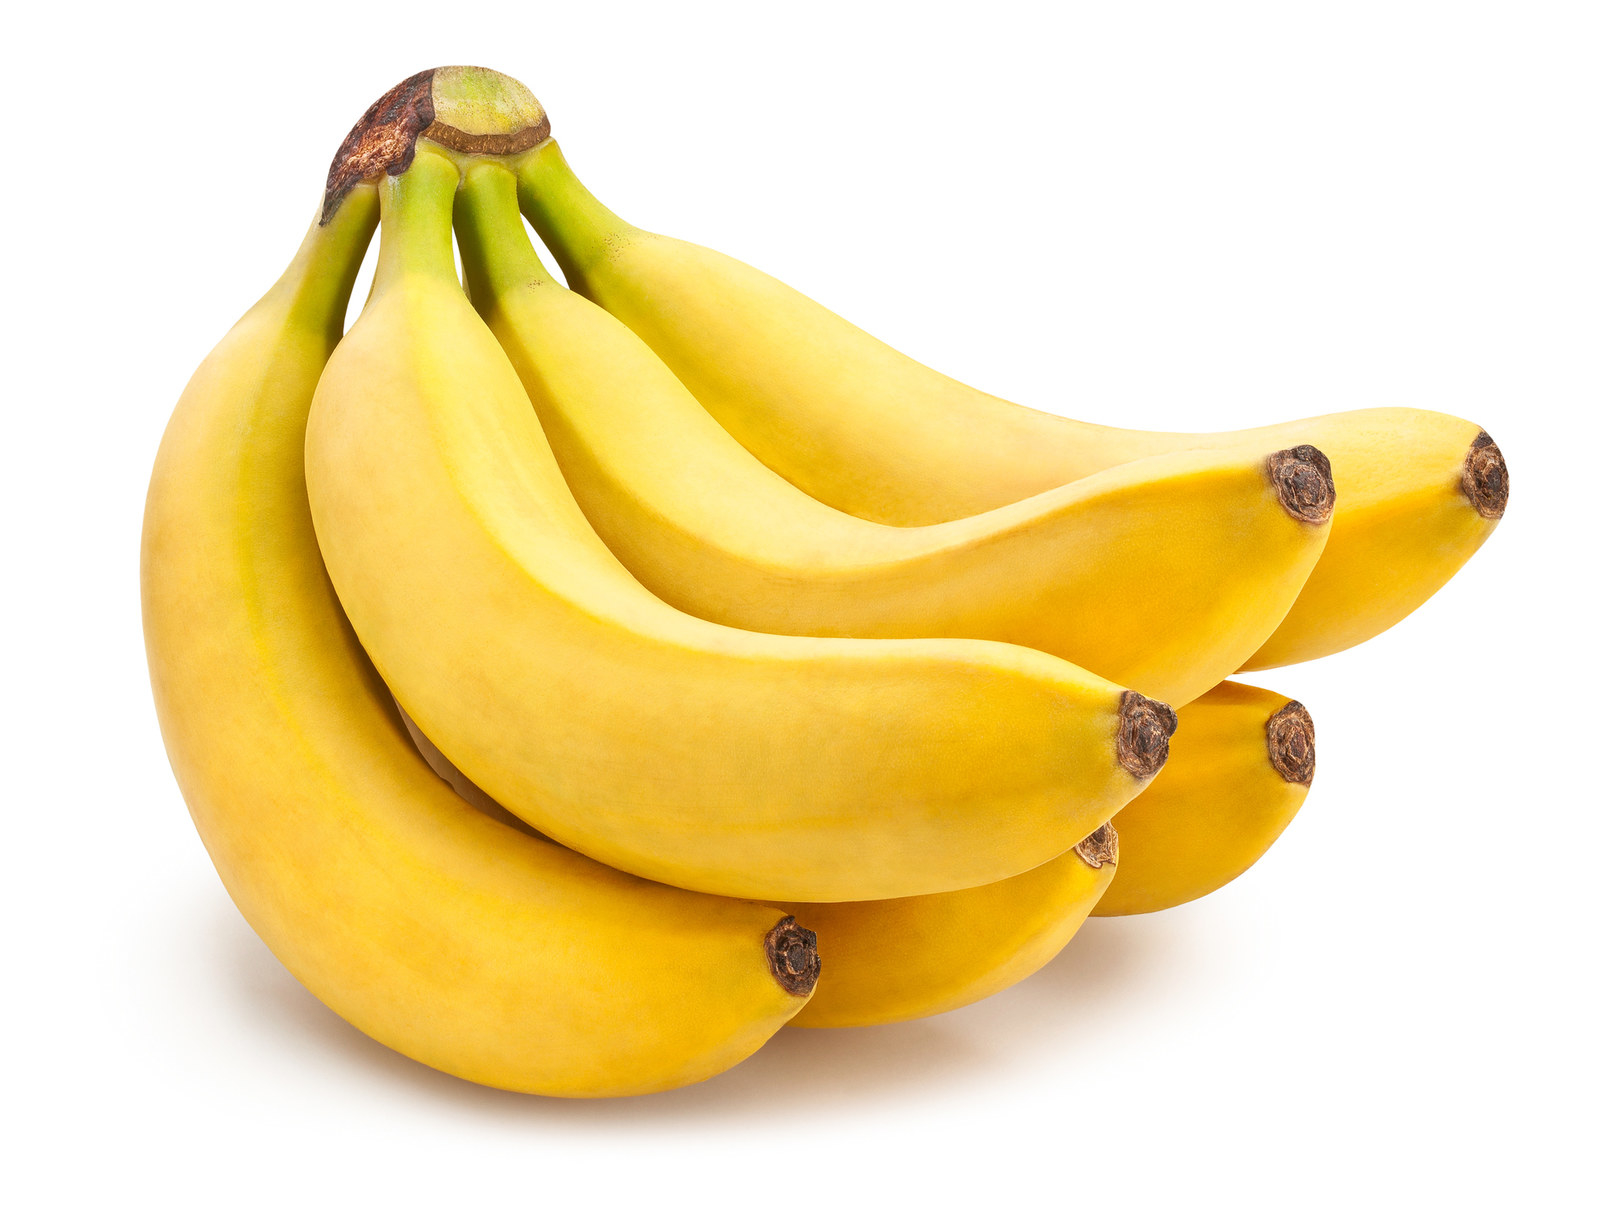 A Korean Market Is Selling Packs Of Bananas Of Varying Ripeness And ...